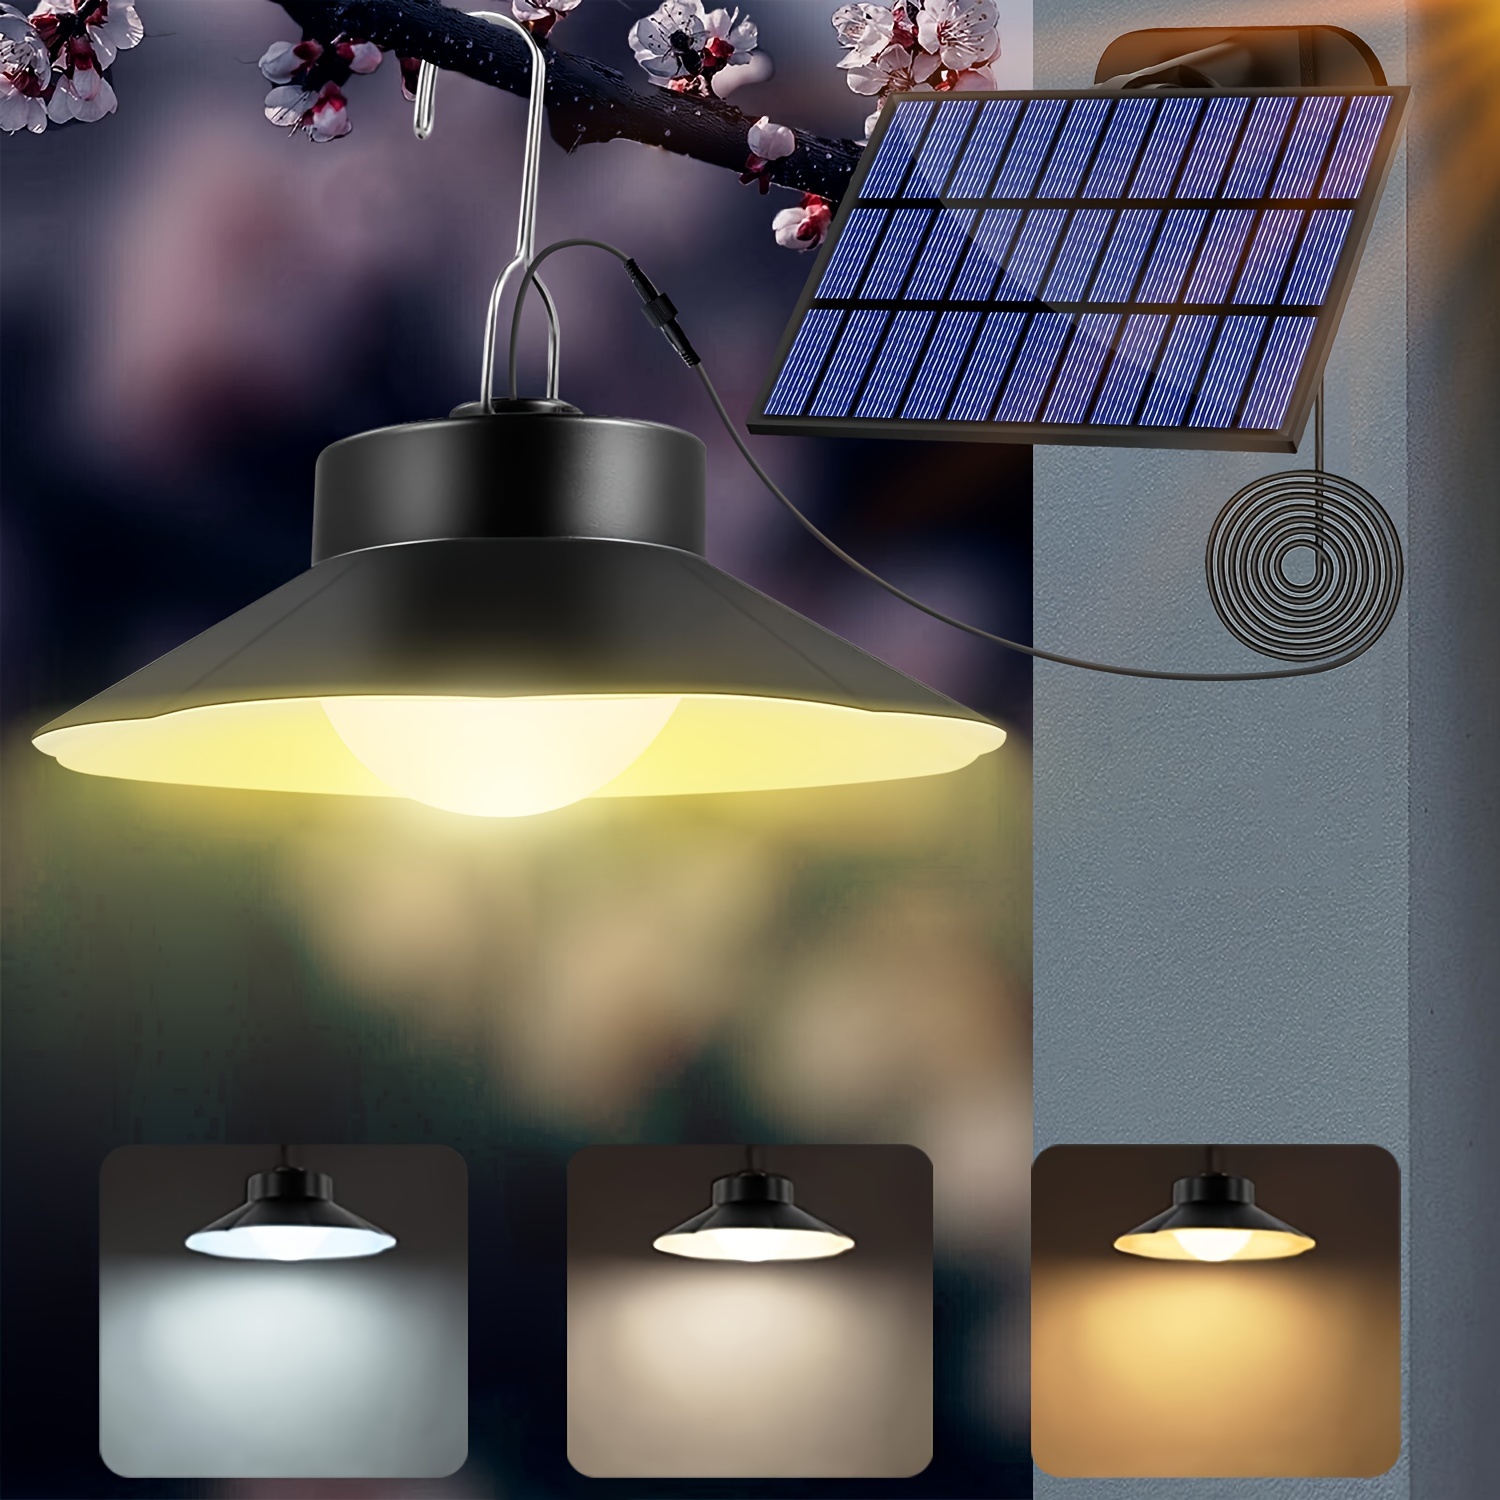 Solar Light Bulbs, Outdoor Indoor Home Chicken Coop Lights, Solar Powered  LED Shed Lights, Camping Lamps for Tent (2 Packs)